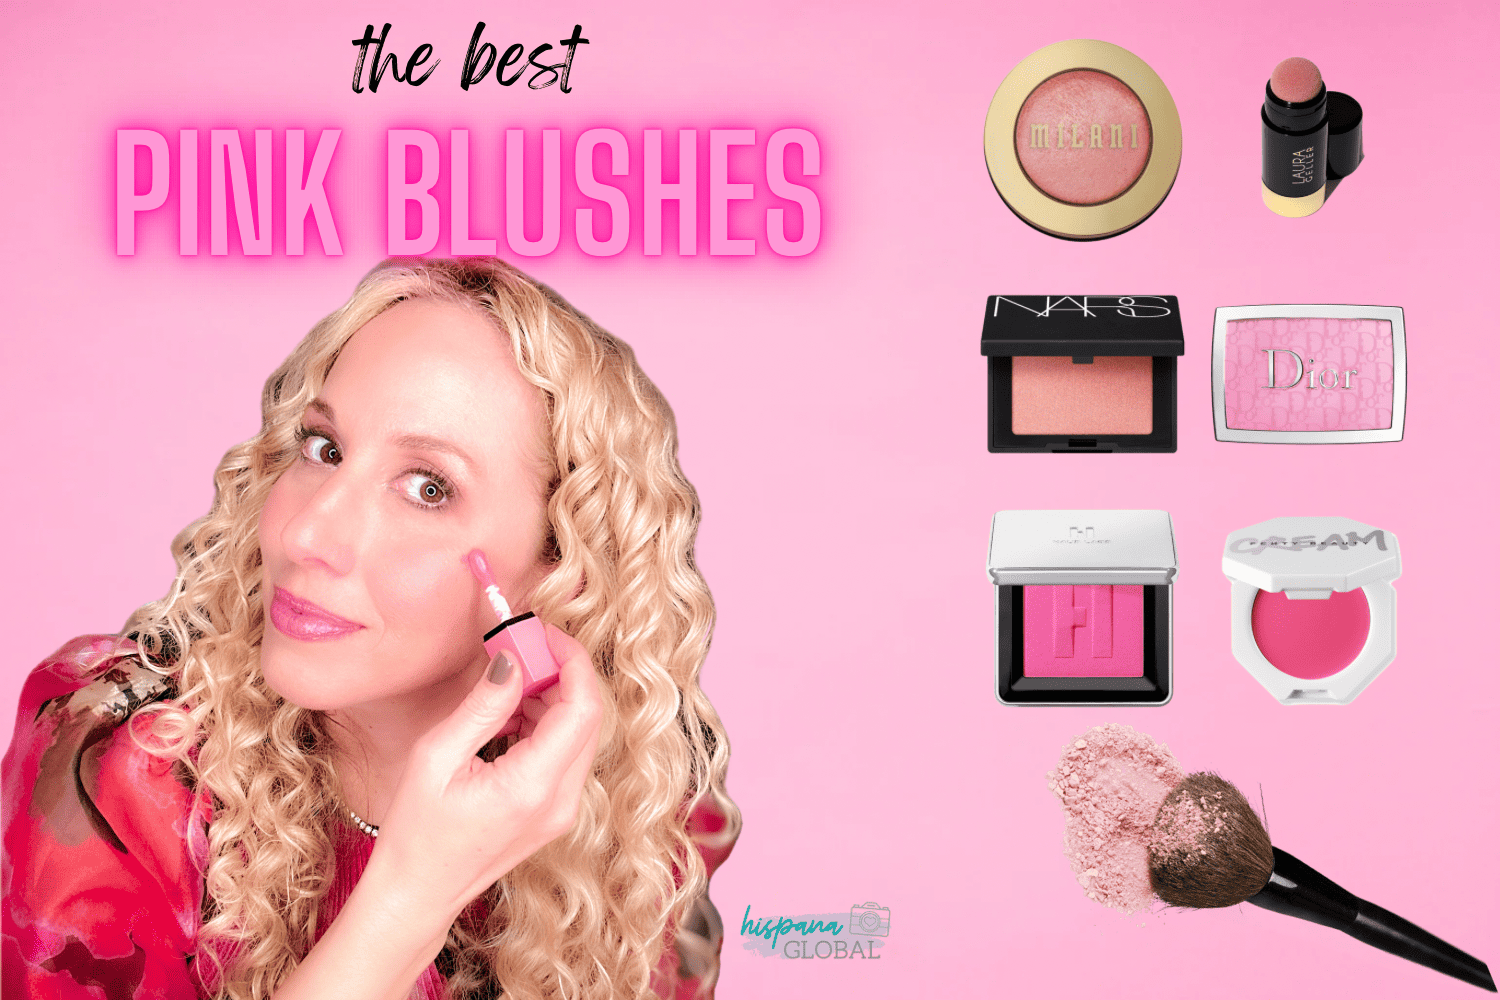 How To Find The Best Pink Blush